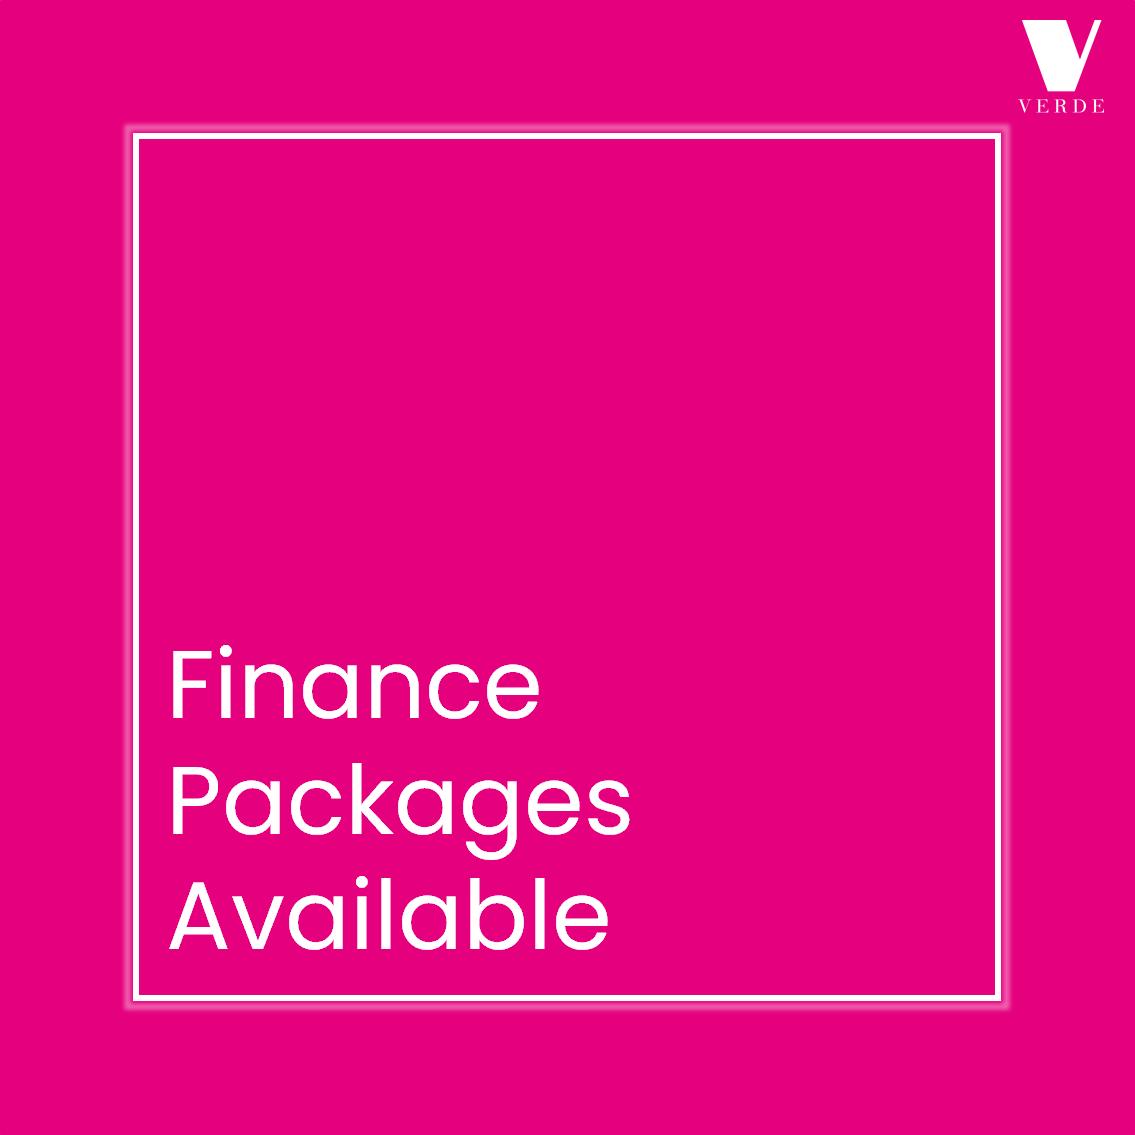 Finance Options Now Available